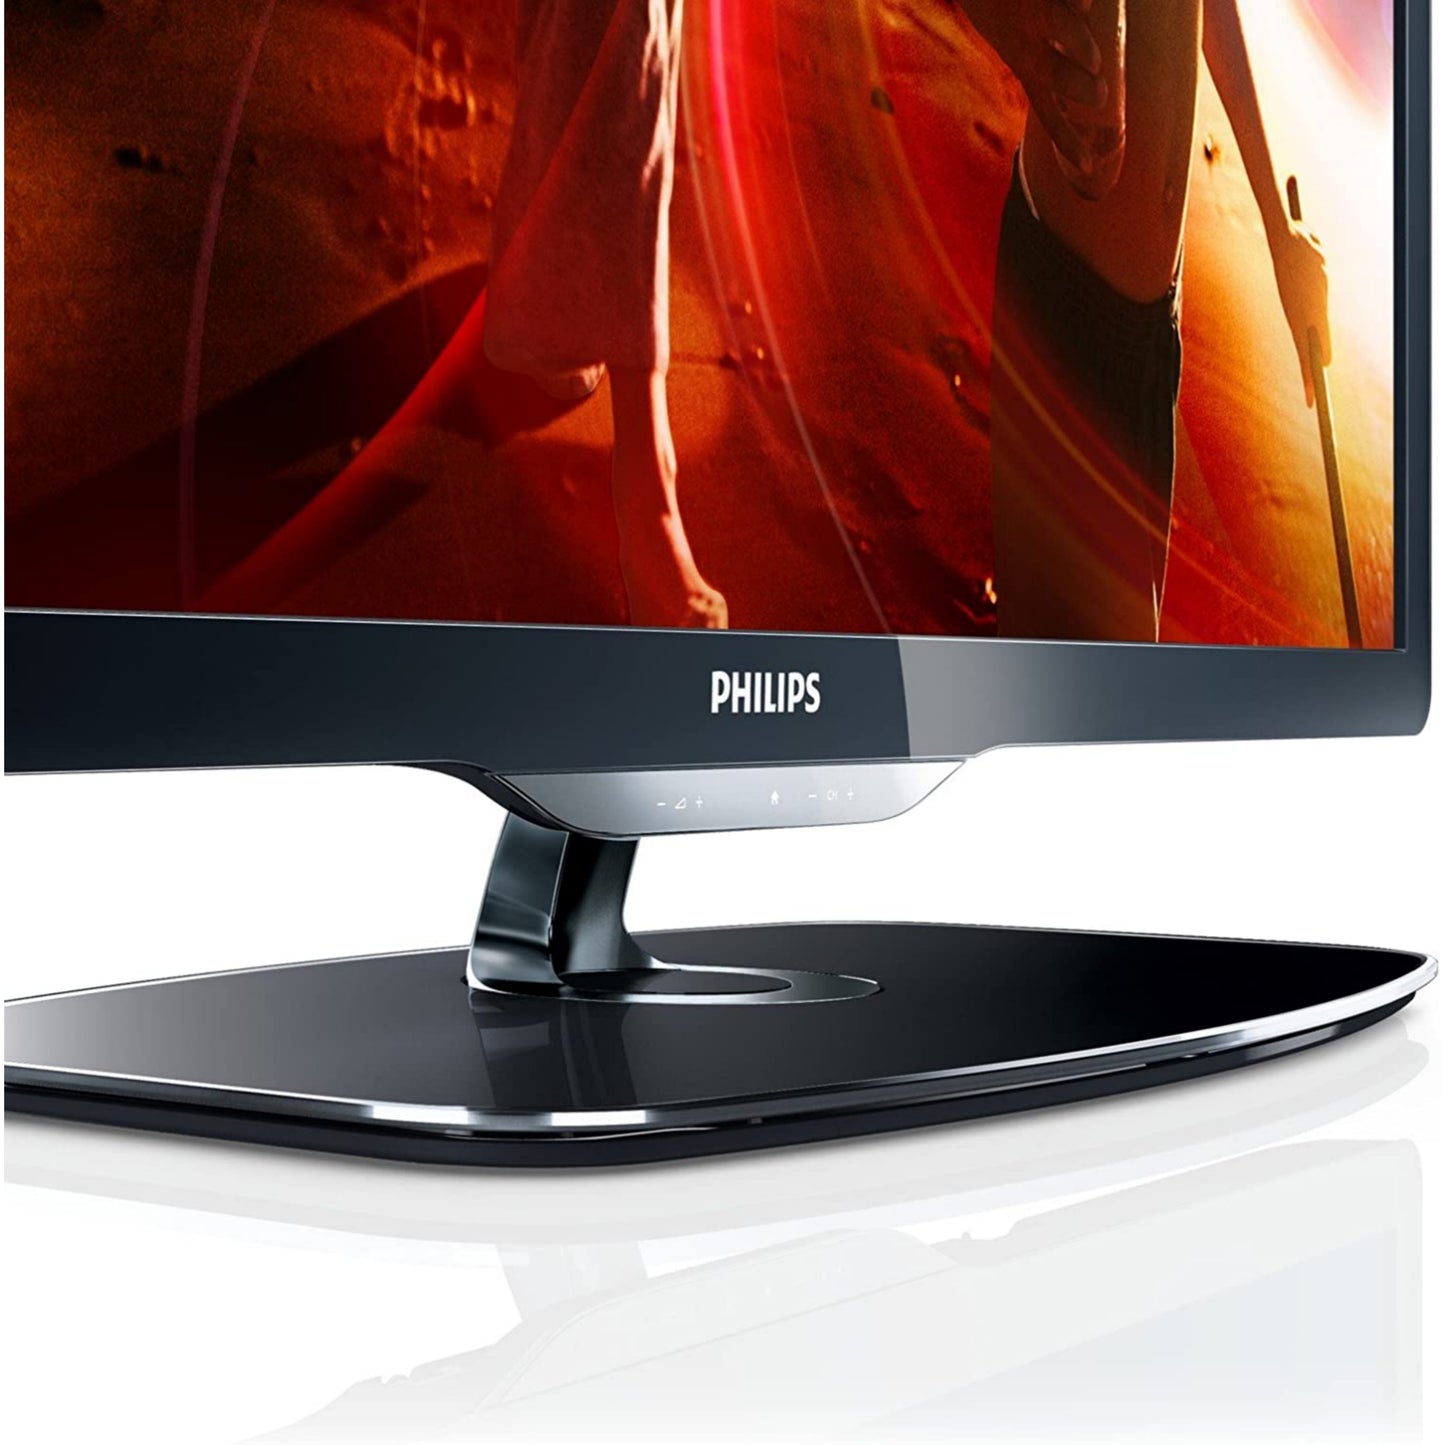 Philips 32 inch Full HD LED TV - Zoomed